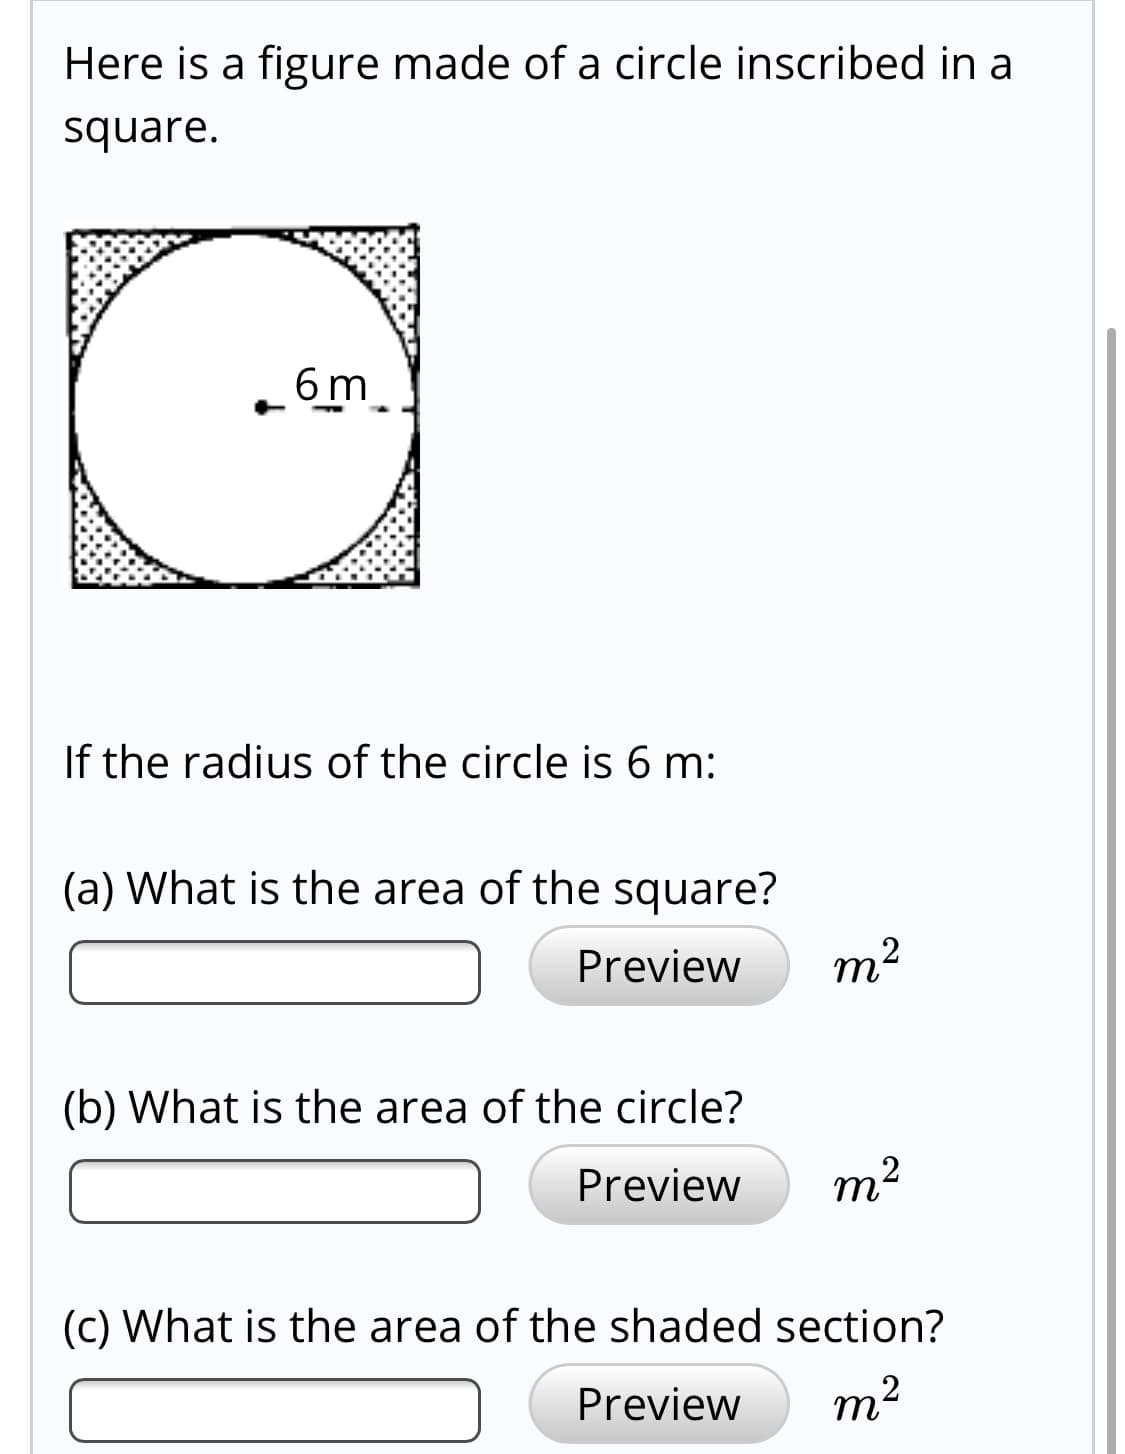 e radius of the circle is 6 m:
What is the area of the square?
Preview
т?
What is the area of the circle?
Preview
m2
Vhat is the area of the shaded section?
Preview
m2
